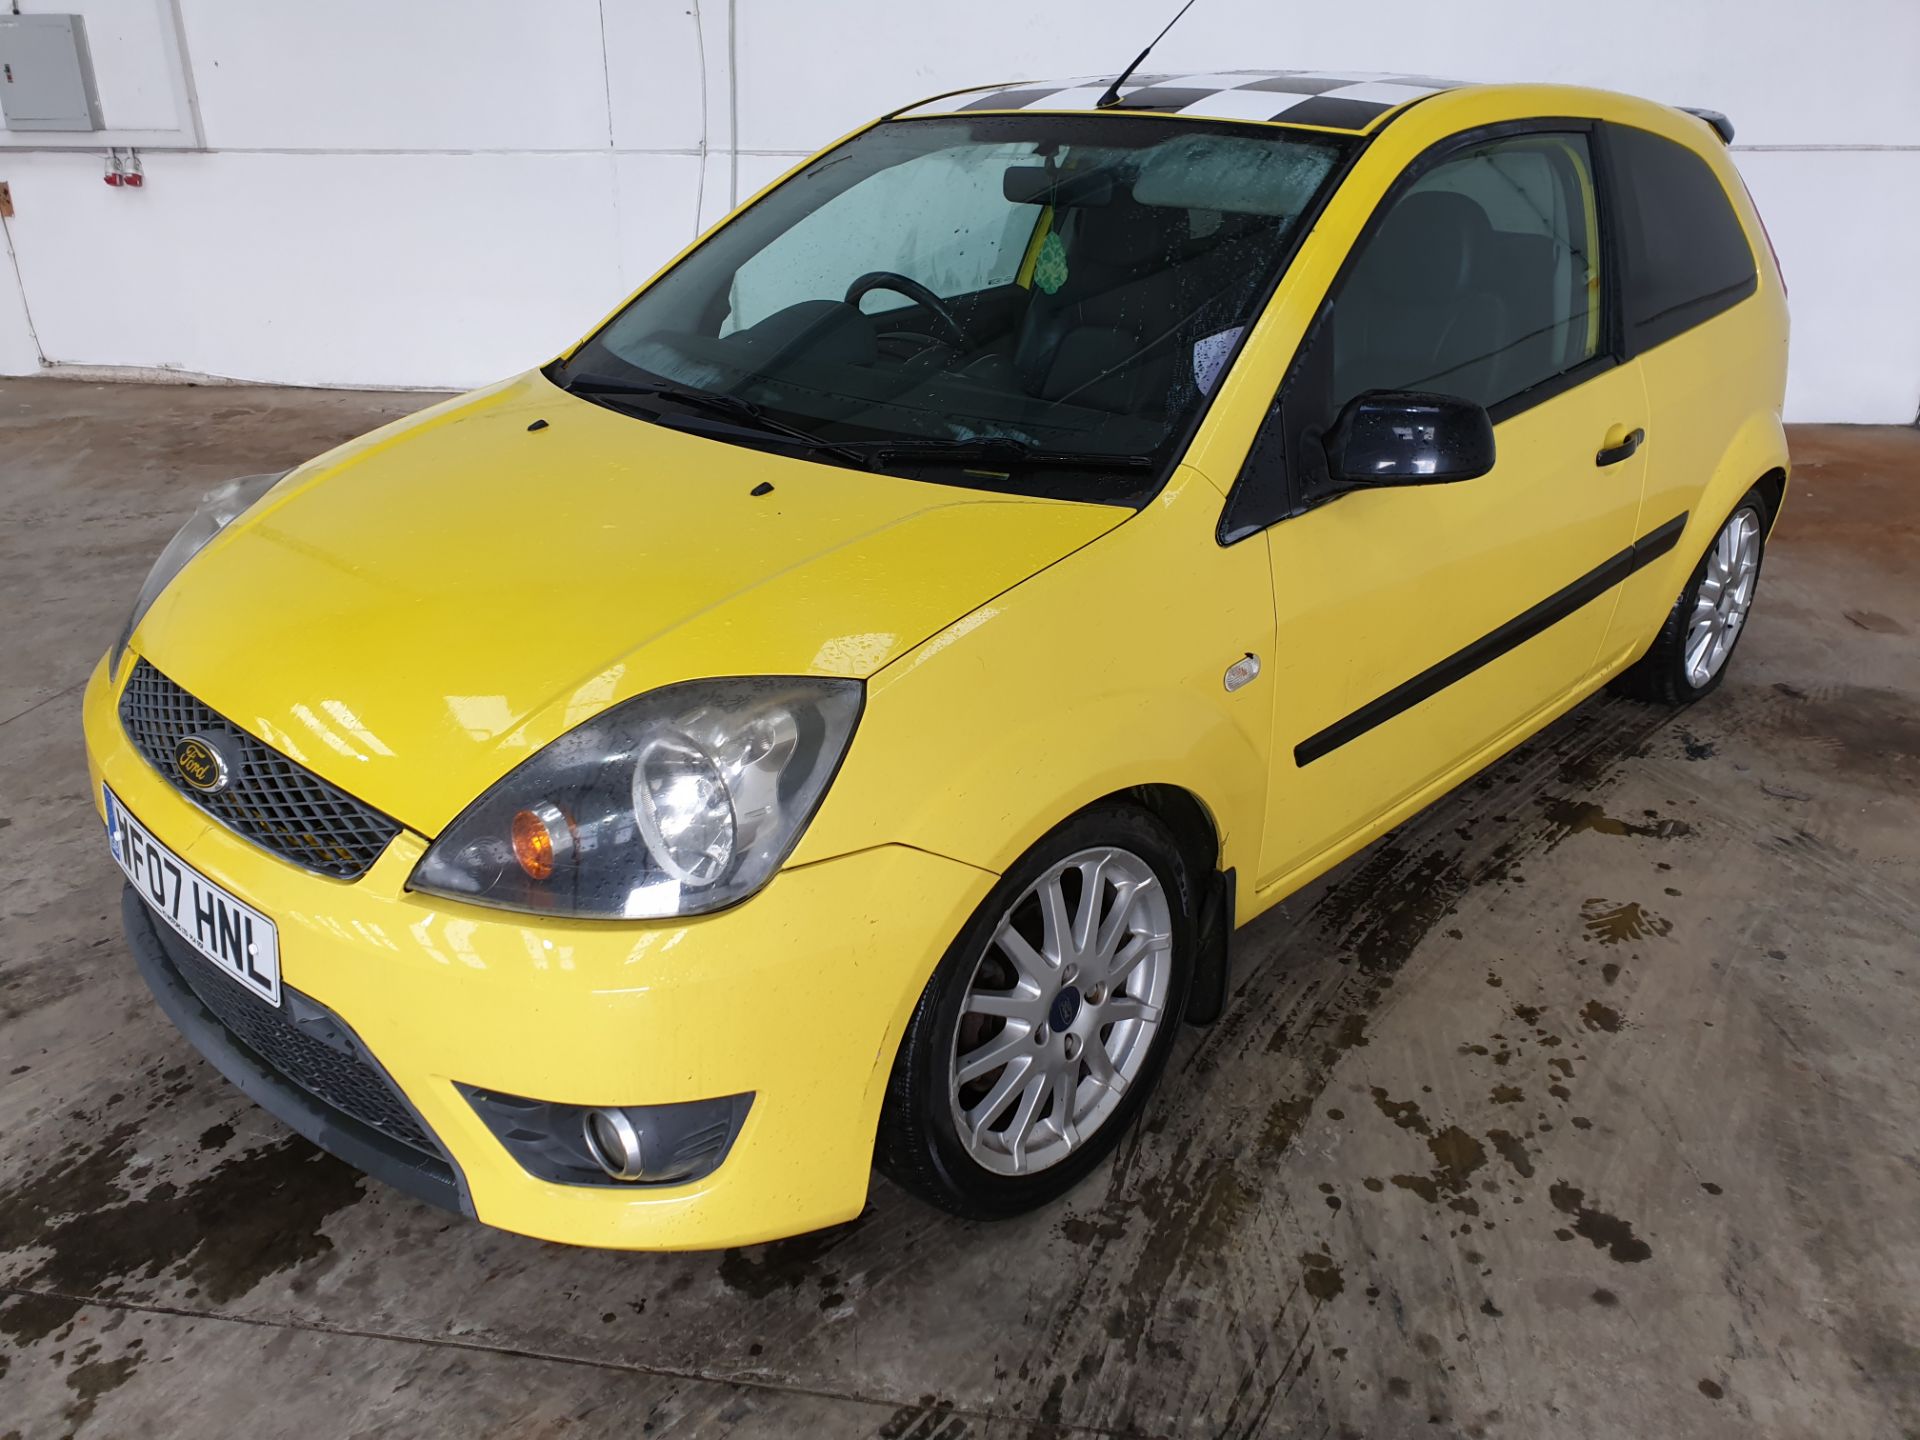 2007 Ford Fiesta Zetec S Special edition - Image 7 of 13